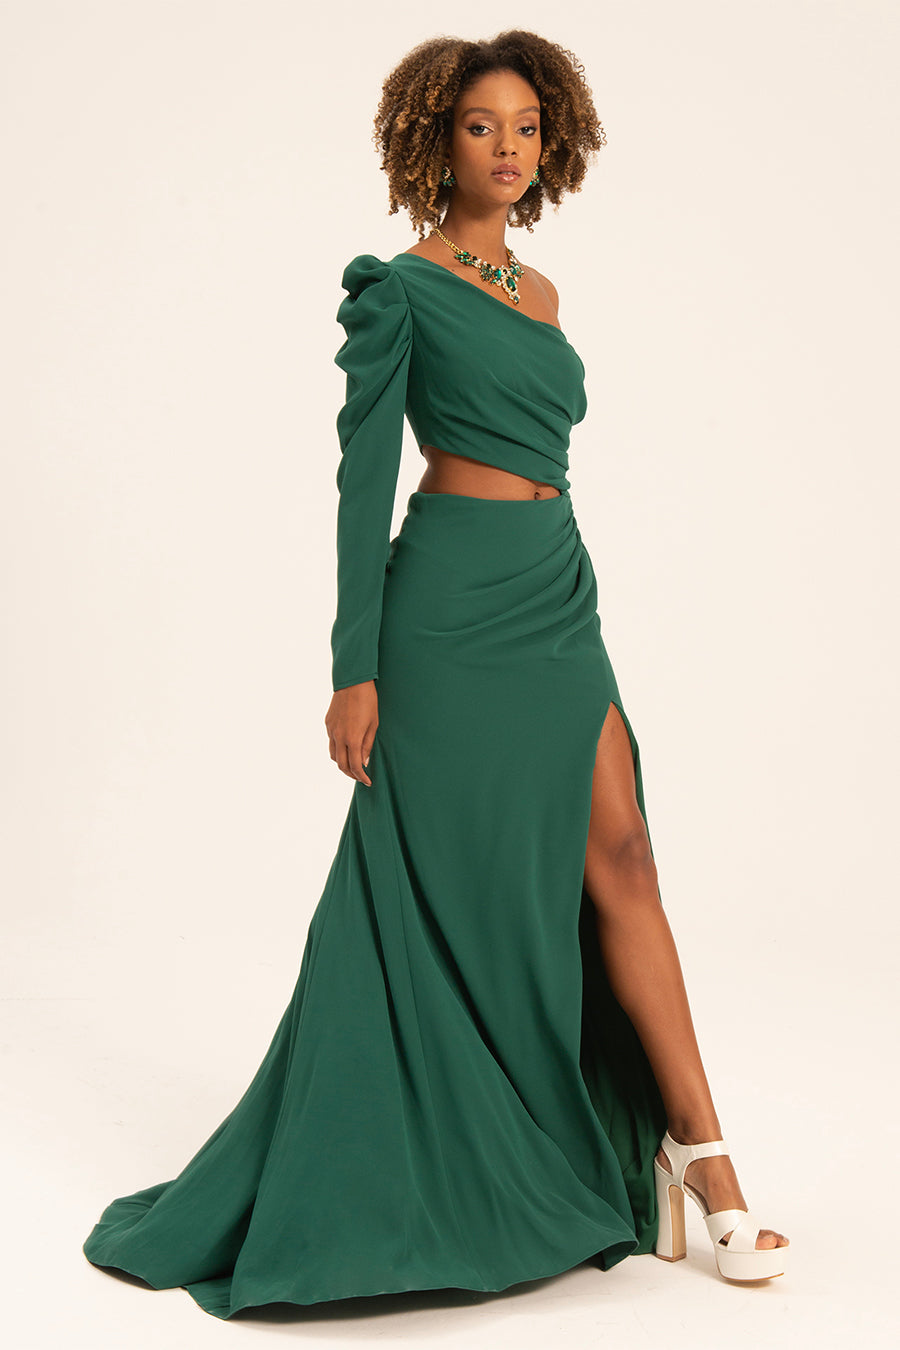 Gracie - Mystic Evenings | Evening and Prom Dresses